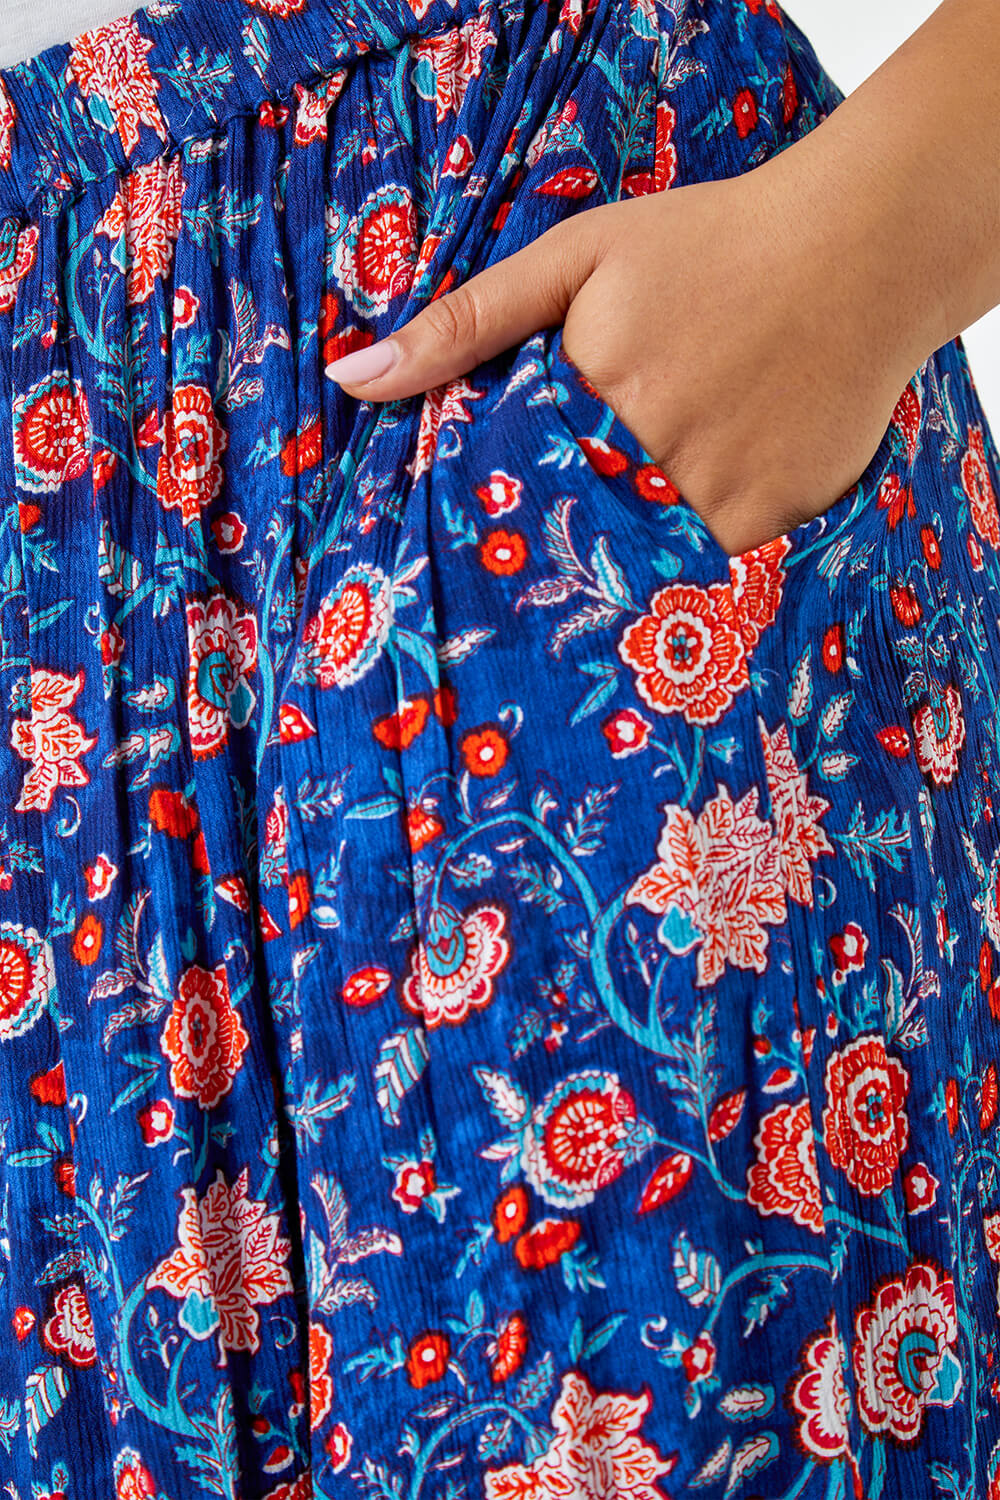 Blue Curve Floral Print Maxi Skirt, Image 5 of 5